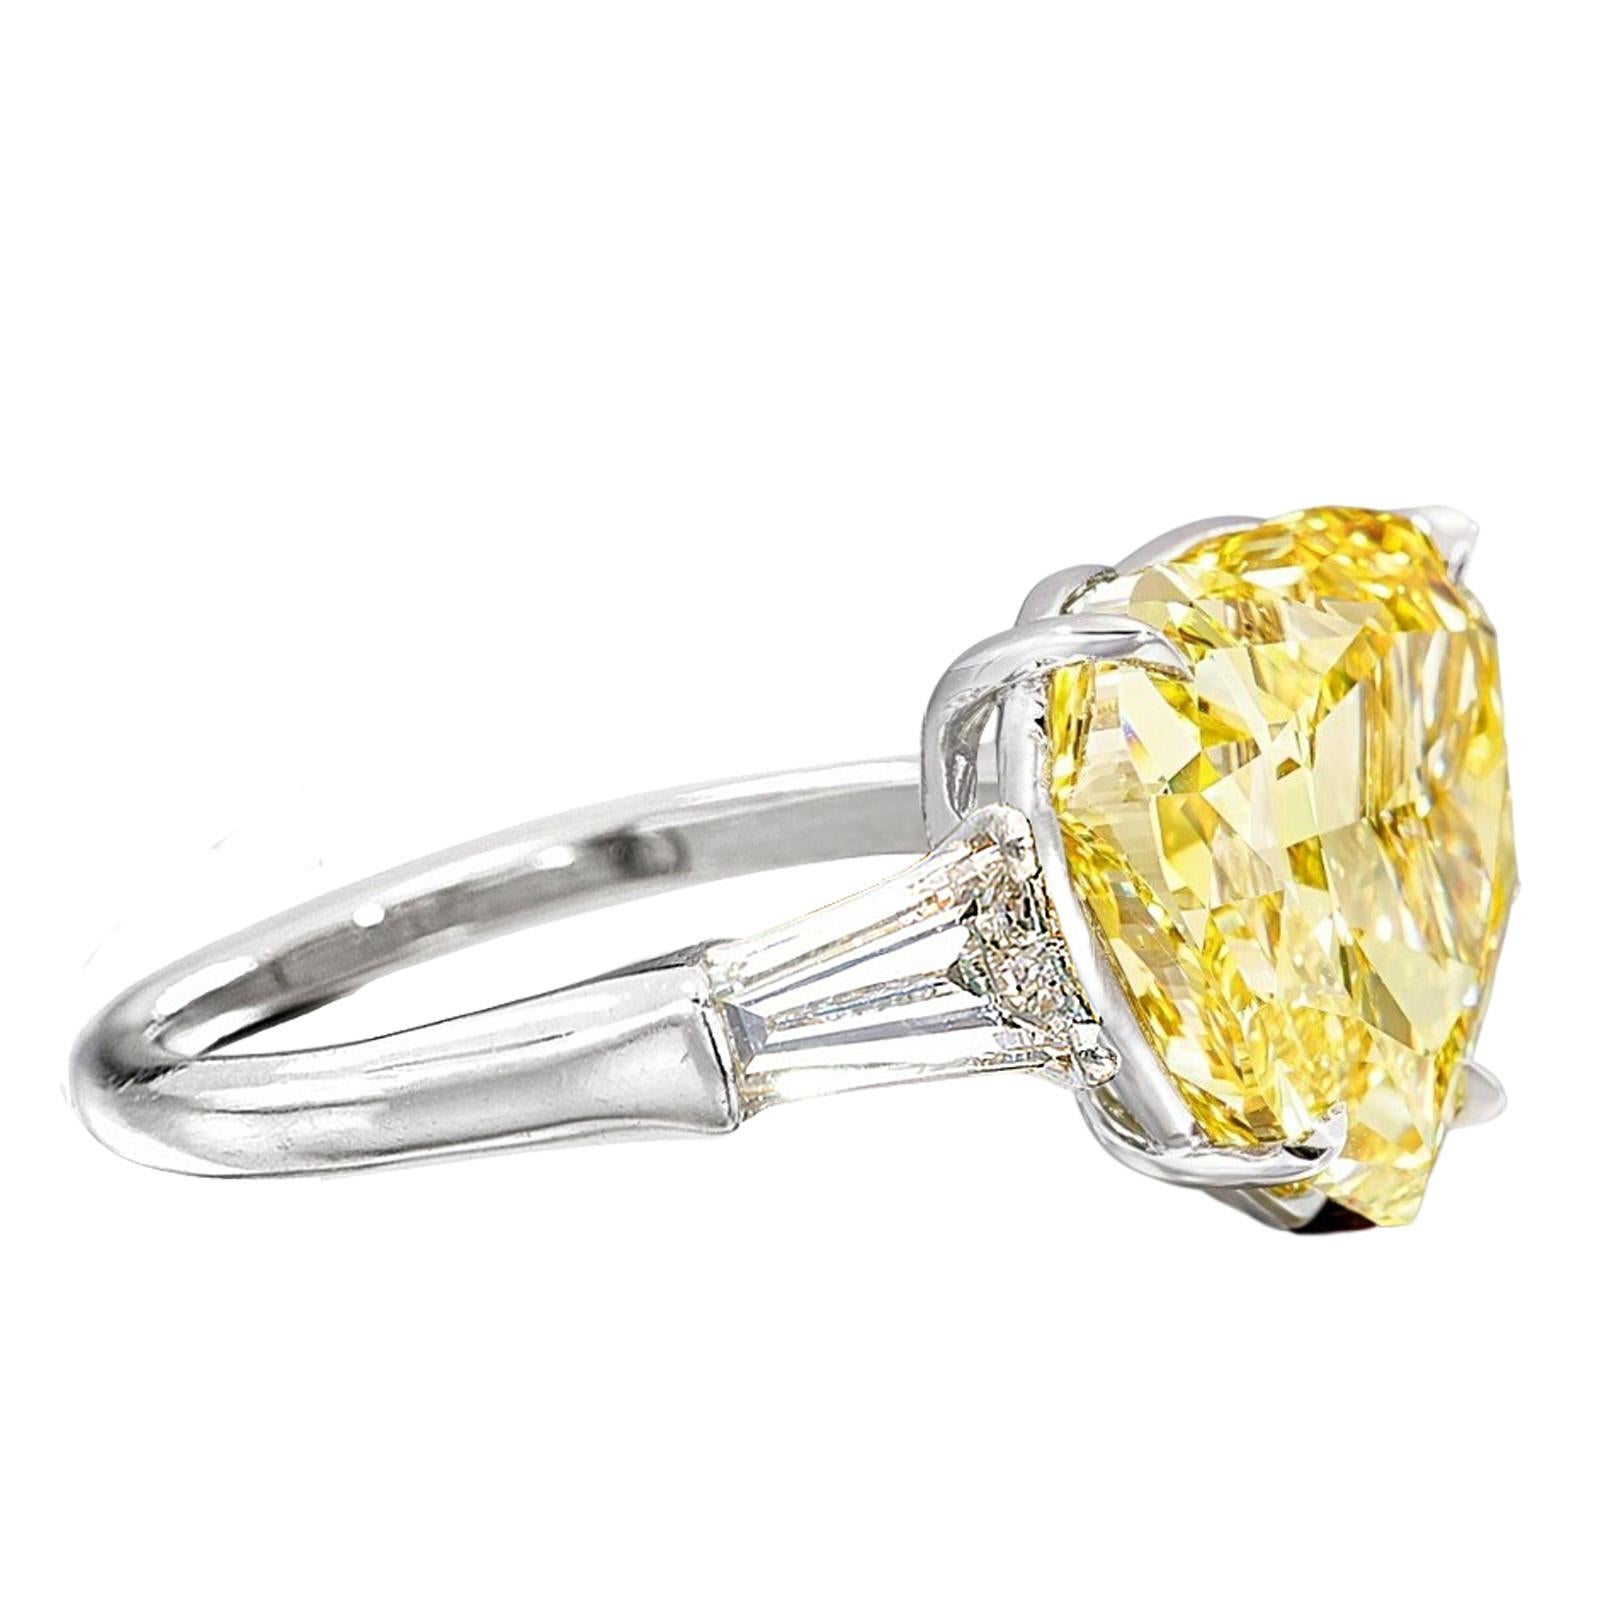 An exquisite GIA certified 5 carat heart cut diamond ring 

set with two beautiful trillion cut diamonds 

and set in solid platinum and 18 yellow gold

the ring is resizable

